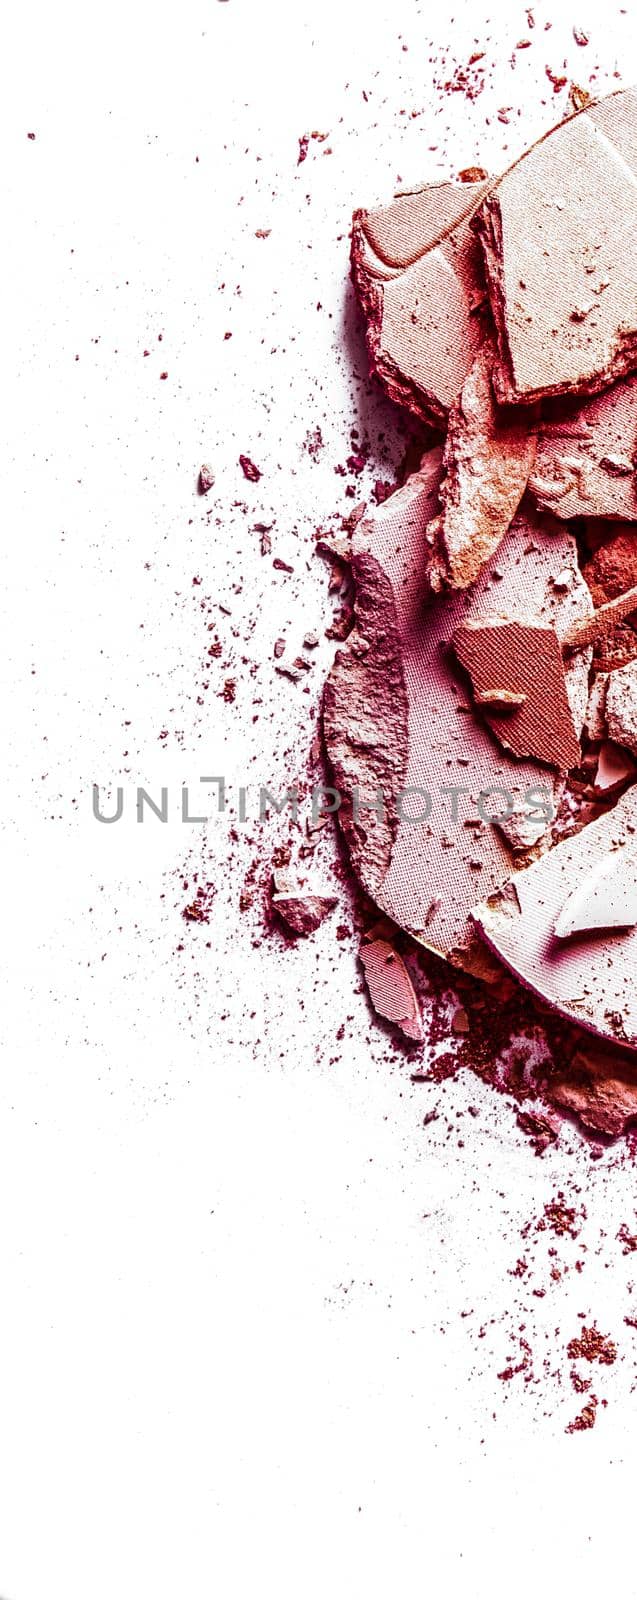 Crushed eyeshadows and powder isolated on white background by Anneleven